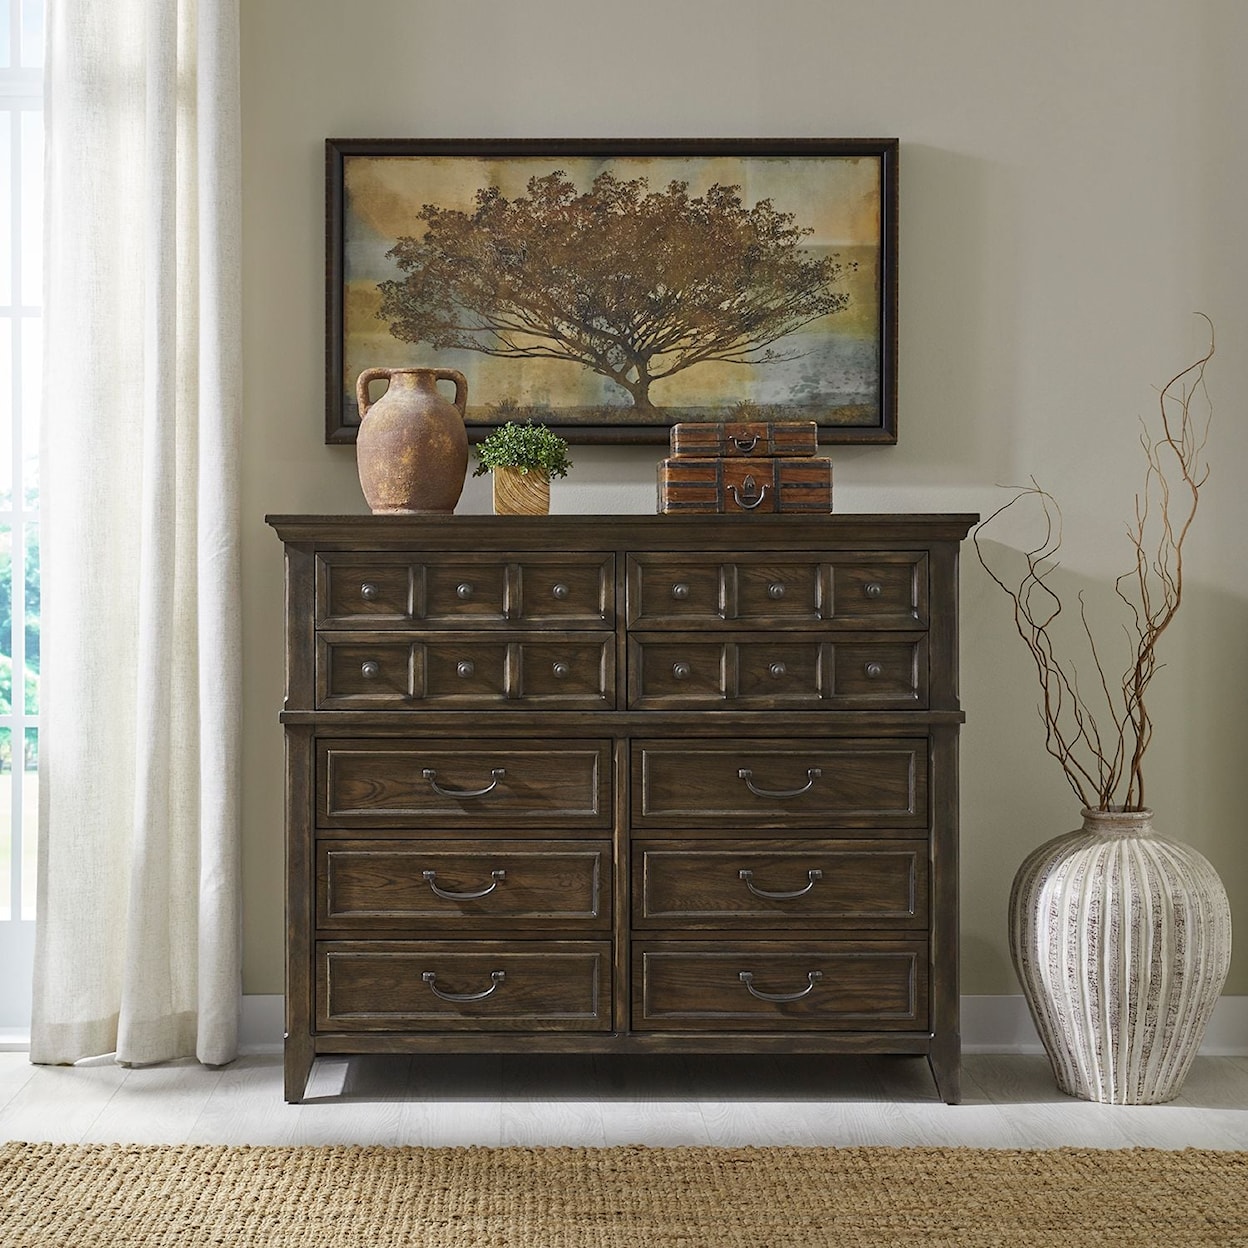 Libby Paradise Valley 10-Drawer Chesser